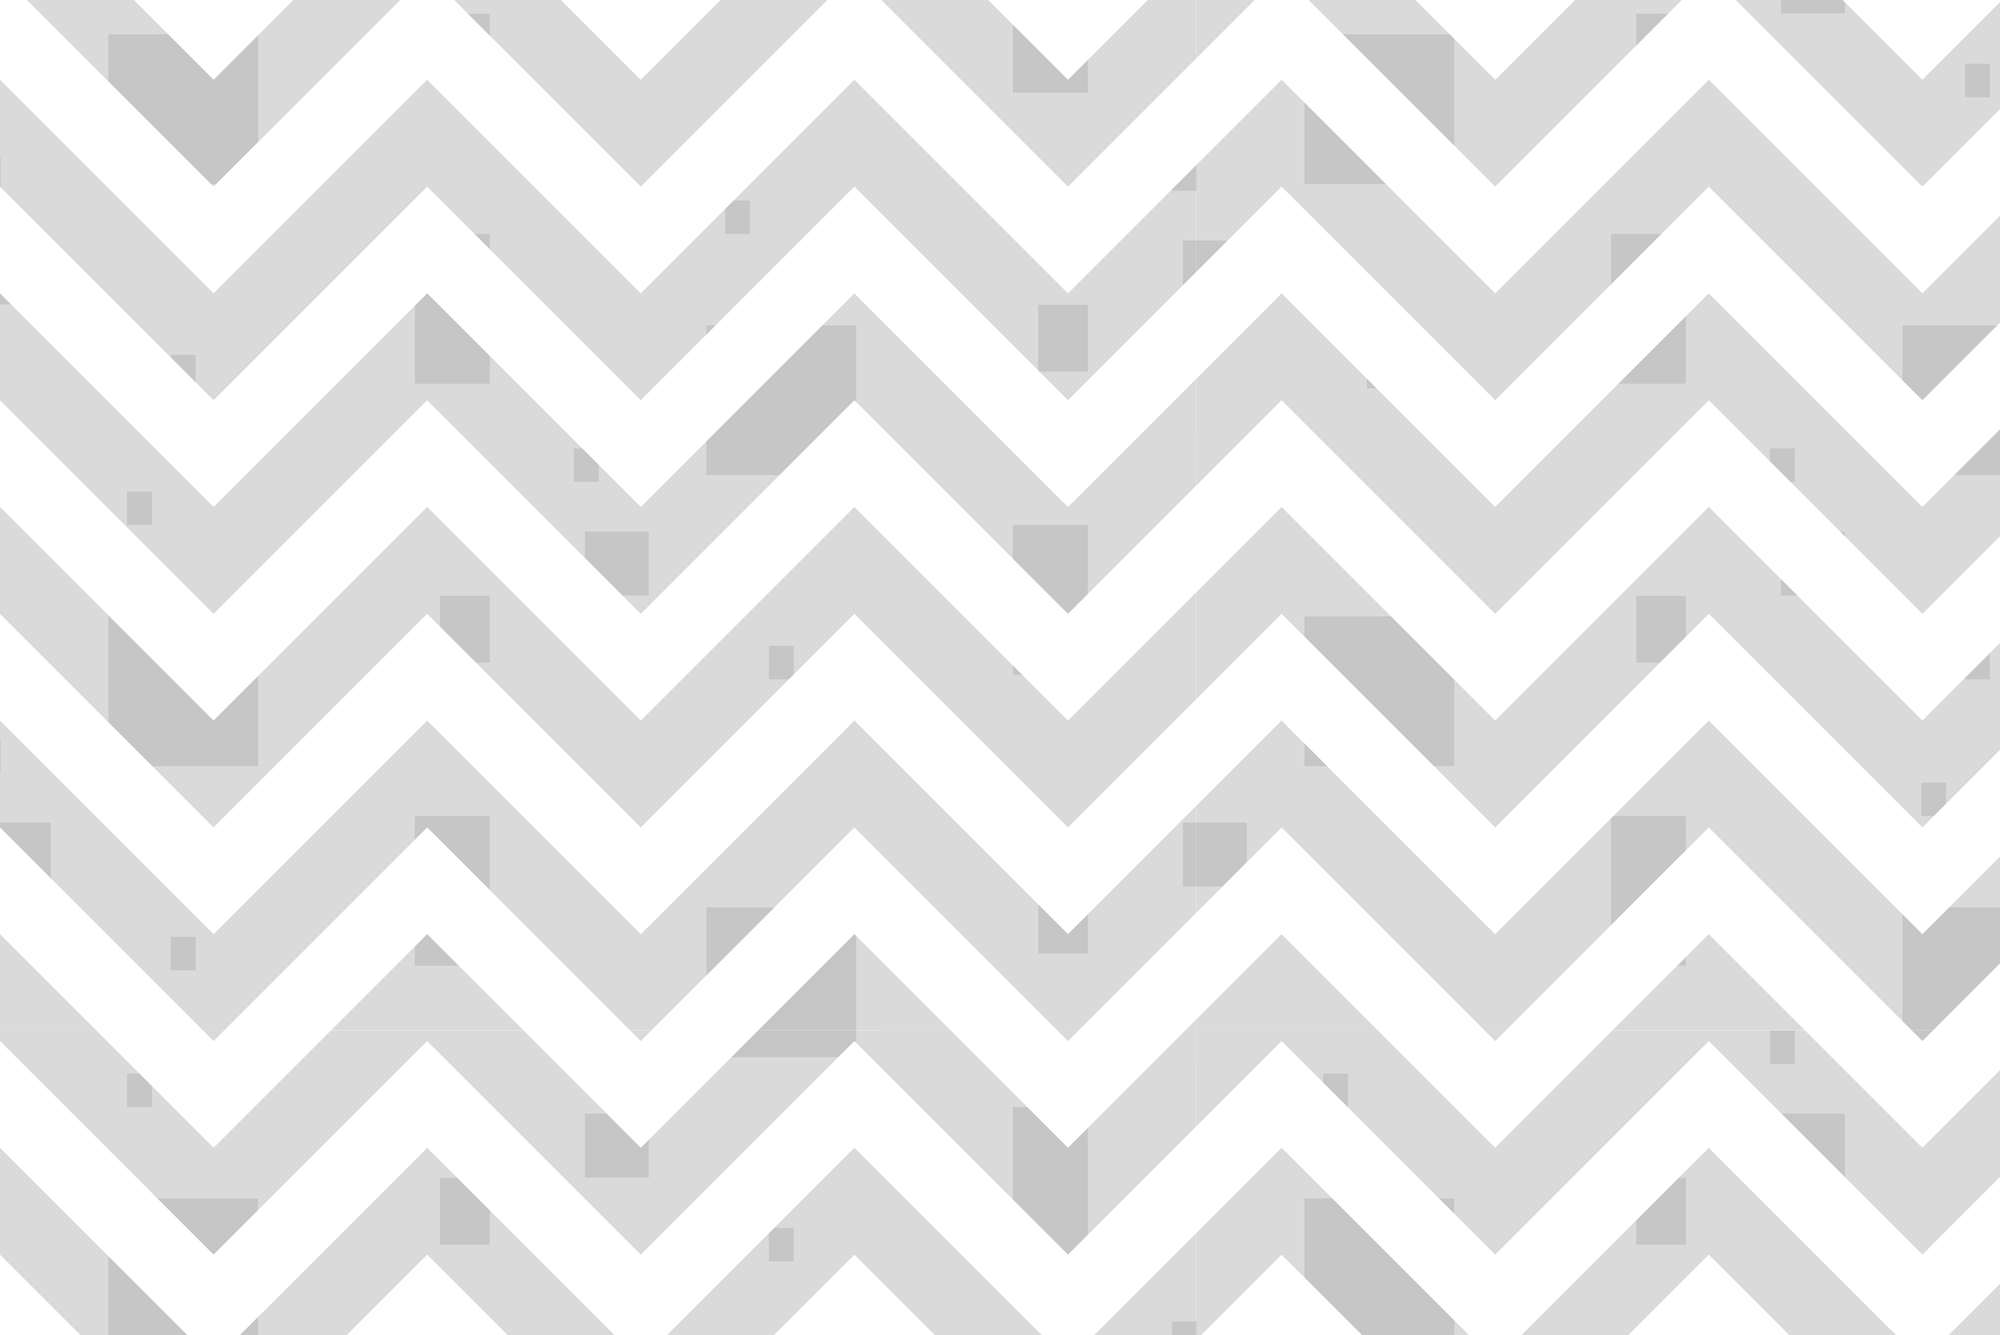             Design wall mural zig zag pattern with small squares grey on premium smooth non-woven
        